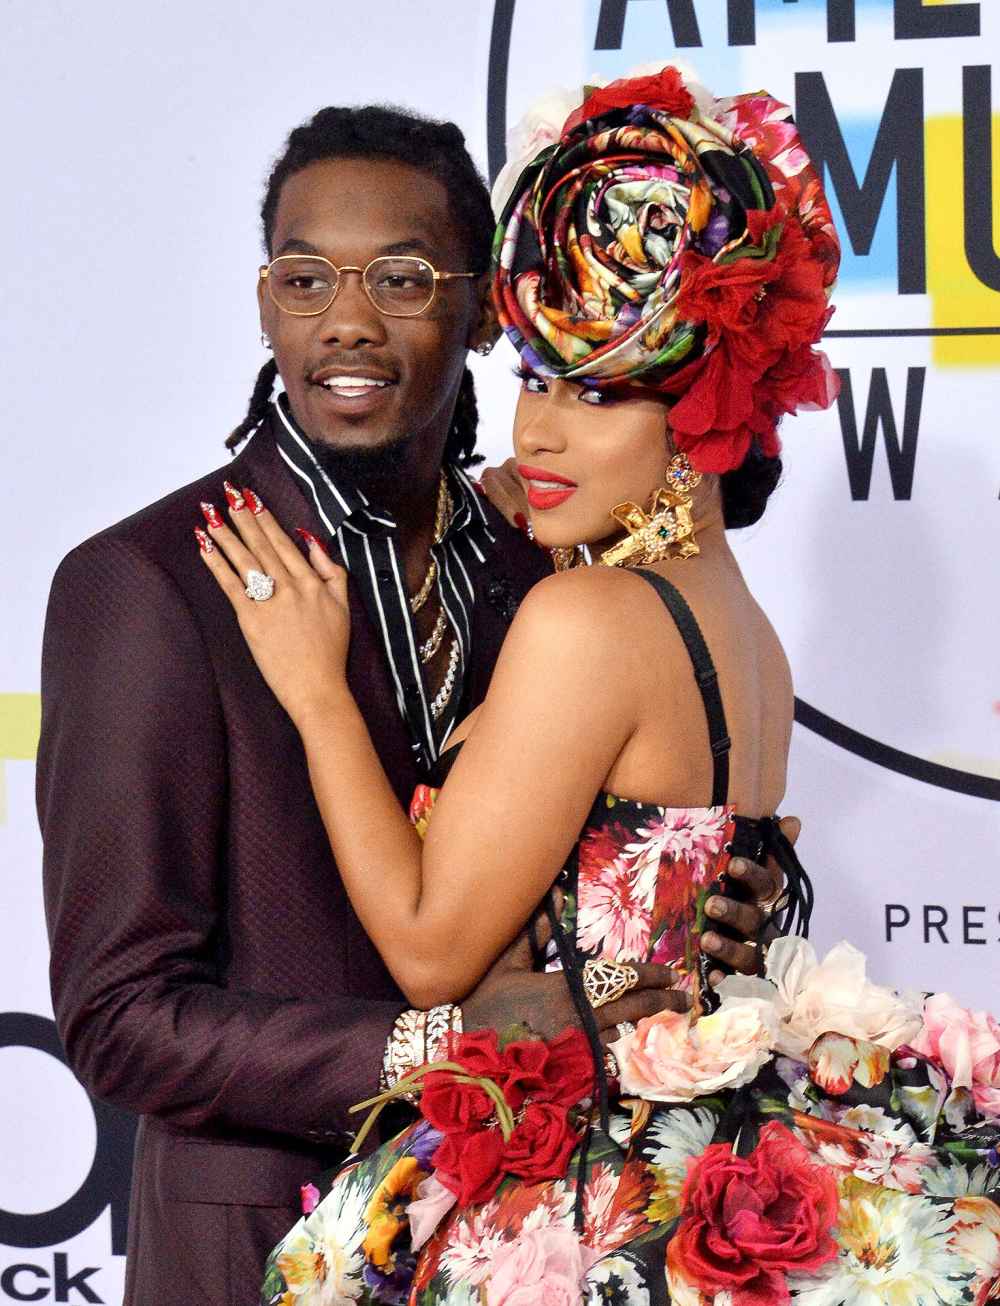 Offset Isn’t a Big Fan of How Cardi B Dresses Their 3-Month-Old Son 2